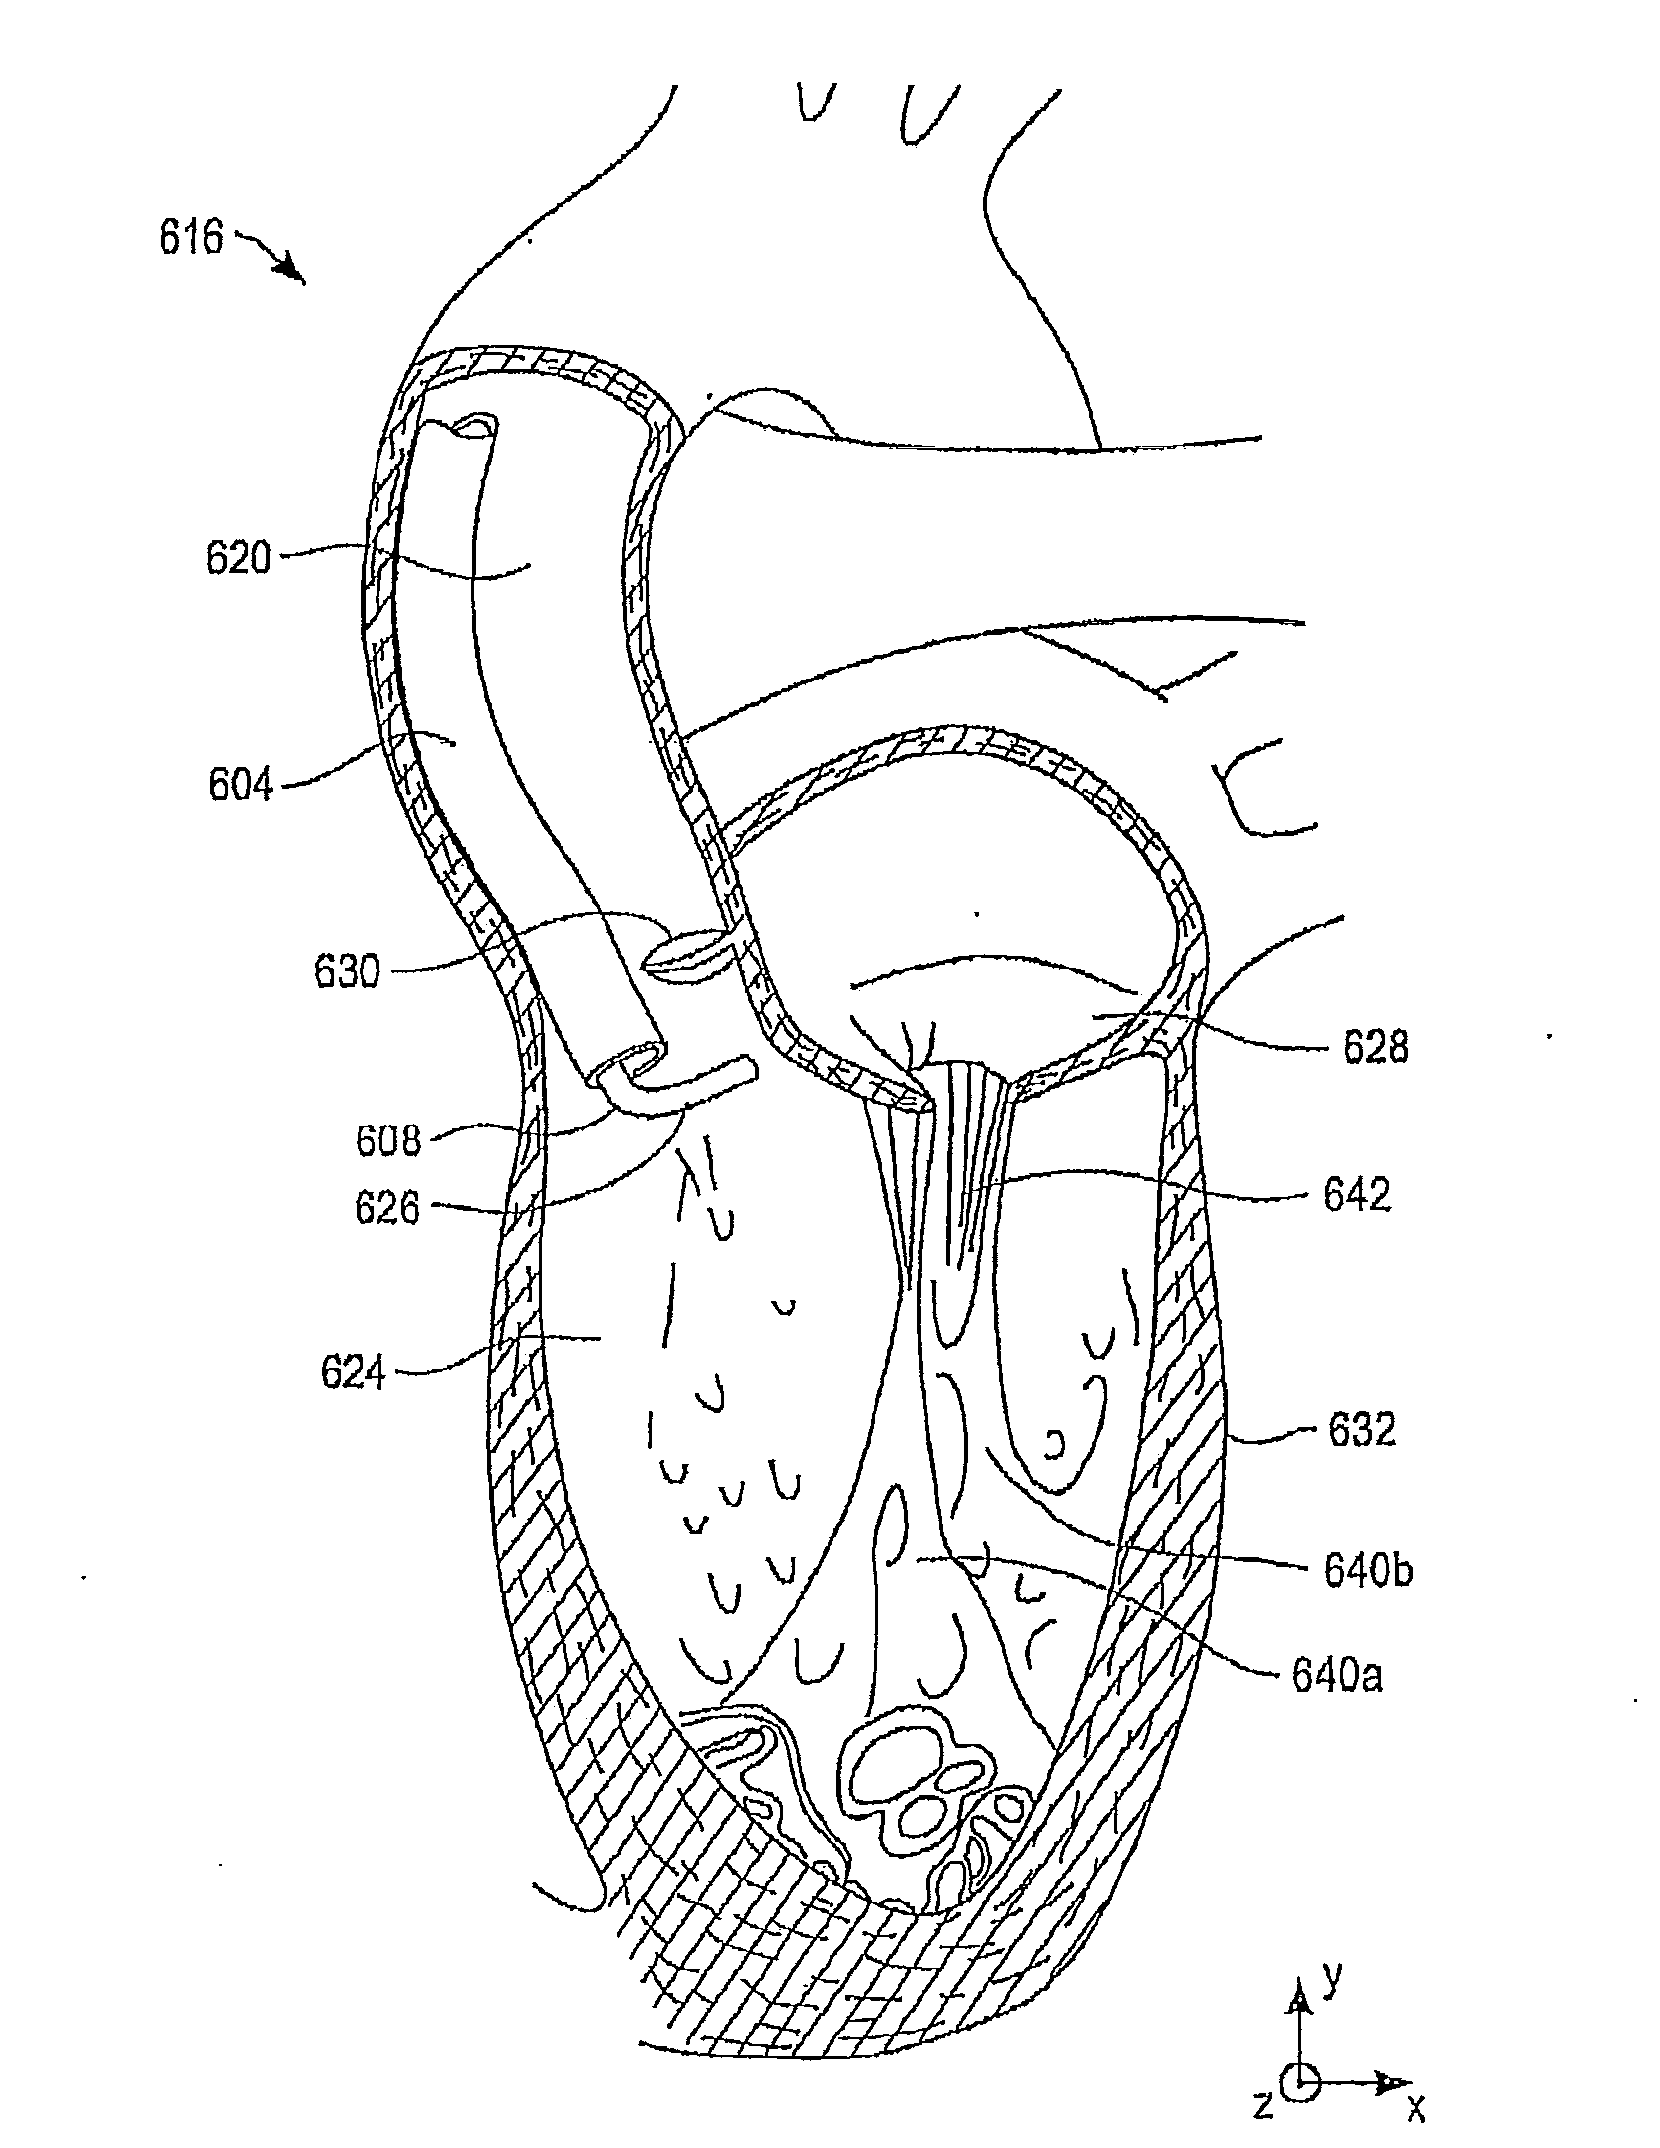 Catheter-based annuloplasty using ventricularly positioned catheter